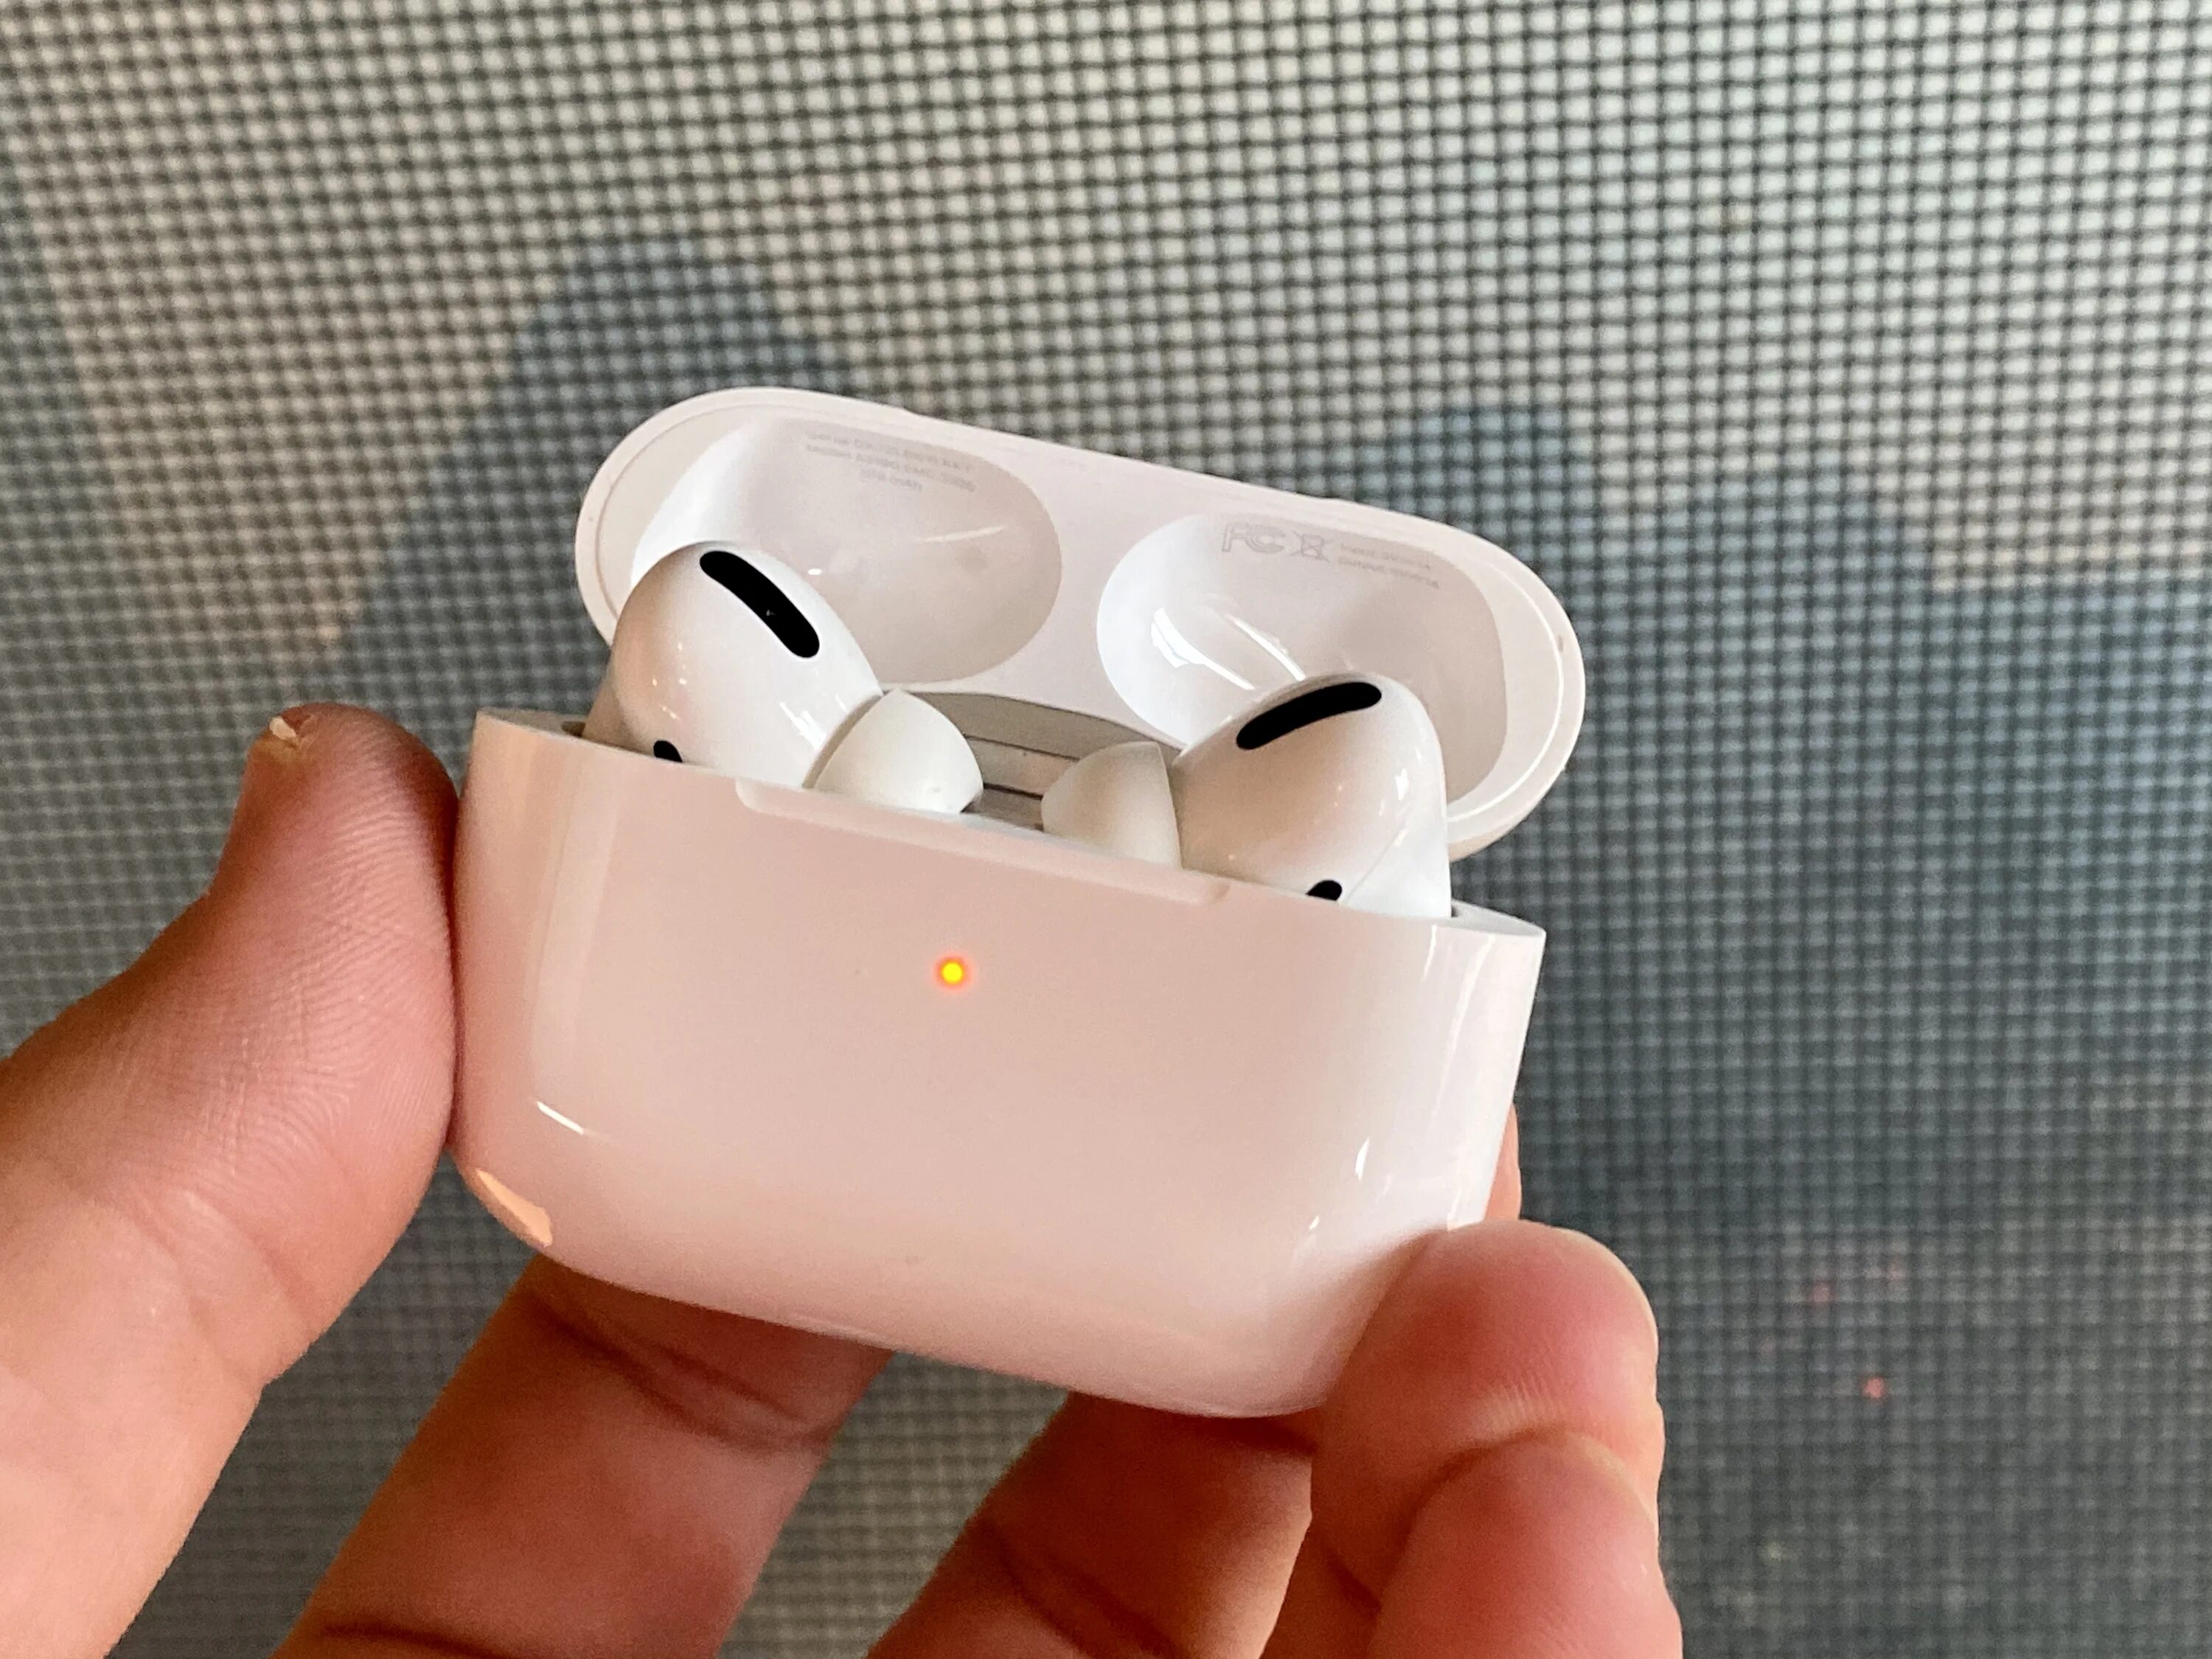 Airpods 2 gen. AIRPODS Pro 3. Air pods Pro 2. Apple AIRPODS Pro 2 2022. AIRPODS 3rd Generation.